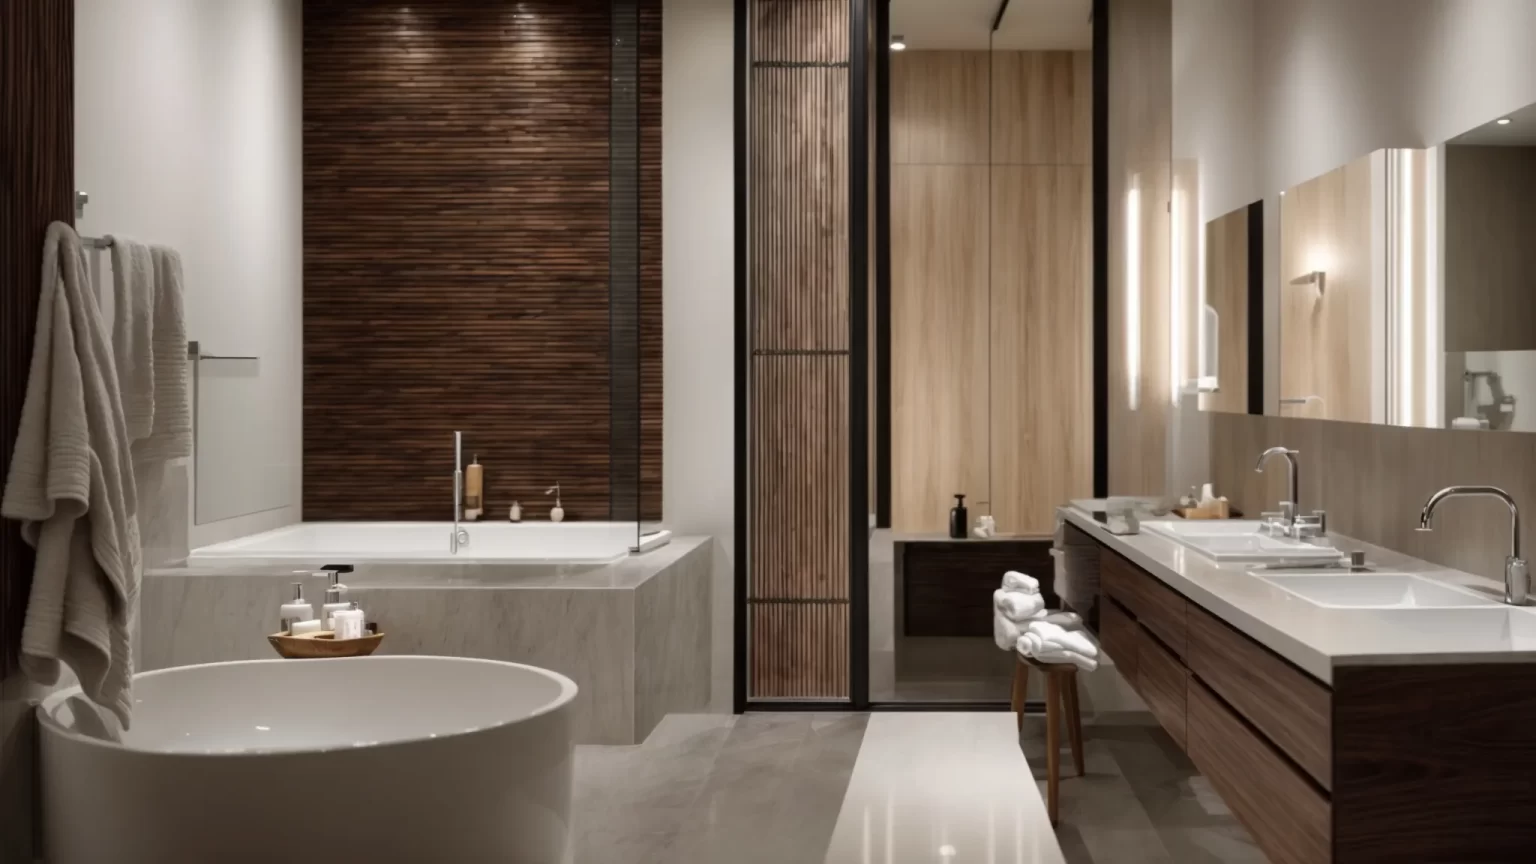 How to increase property value with Barrie bathroom renovations